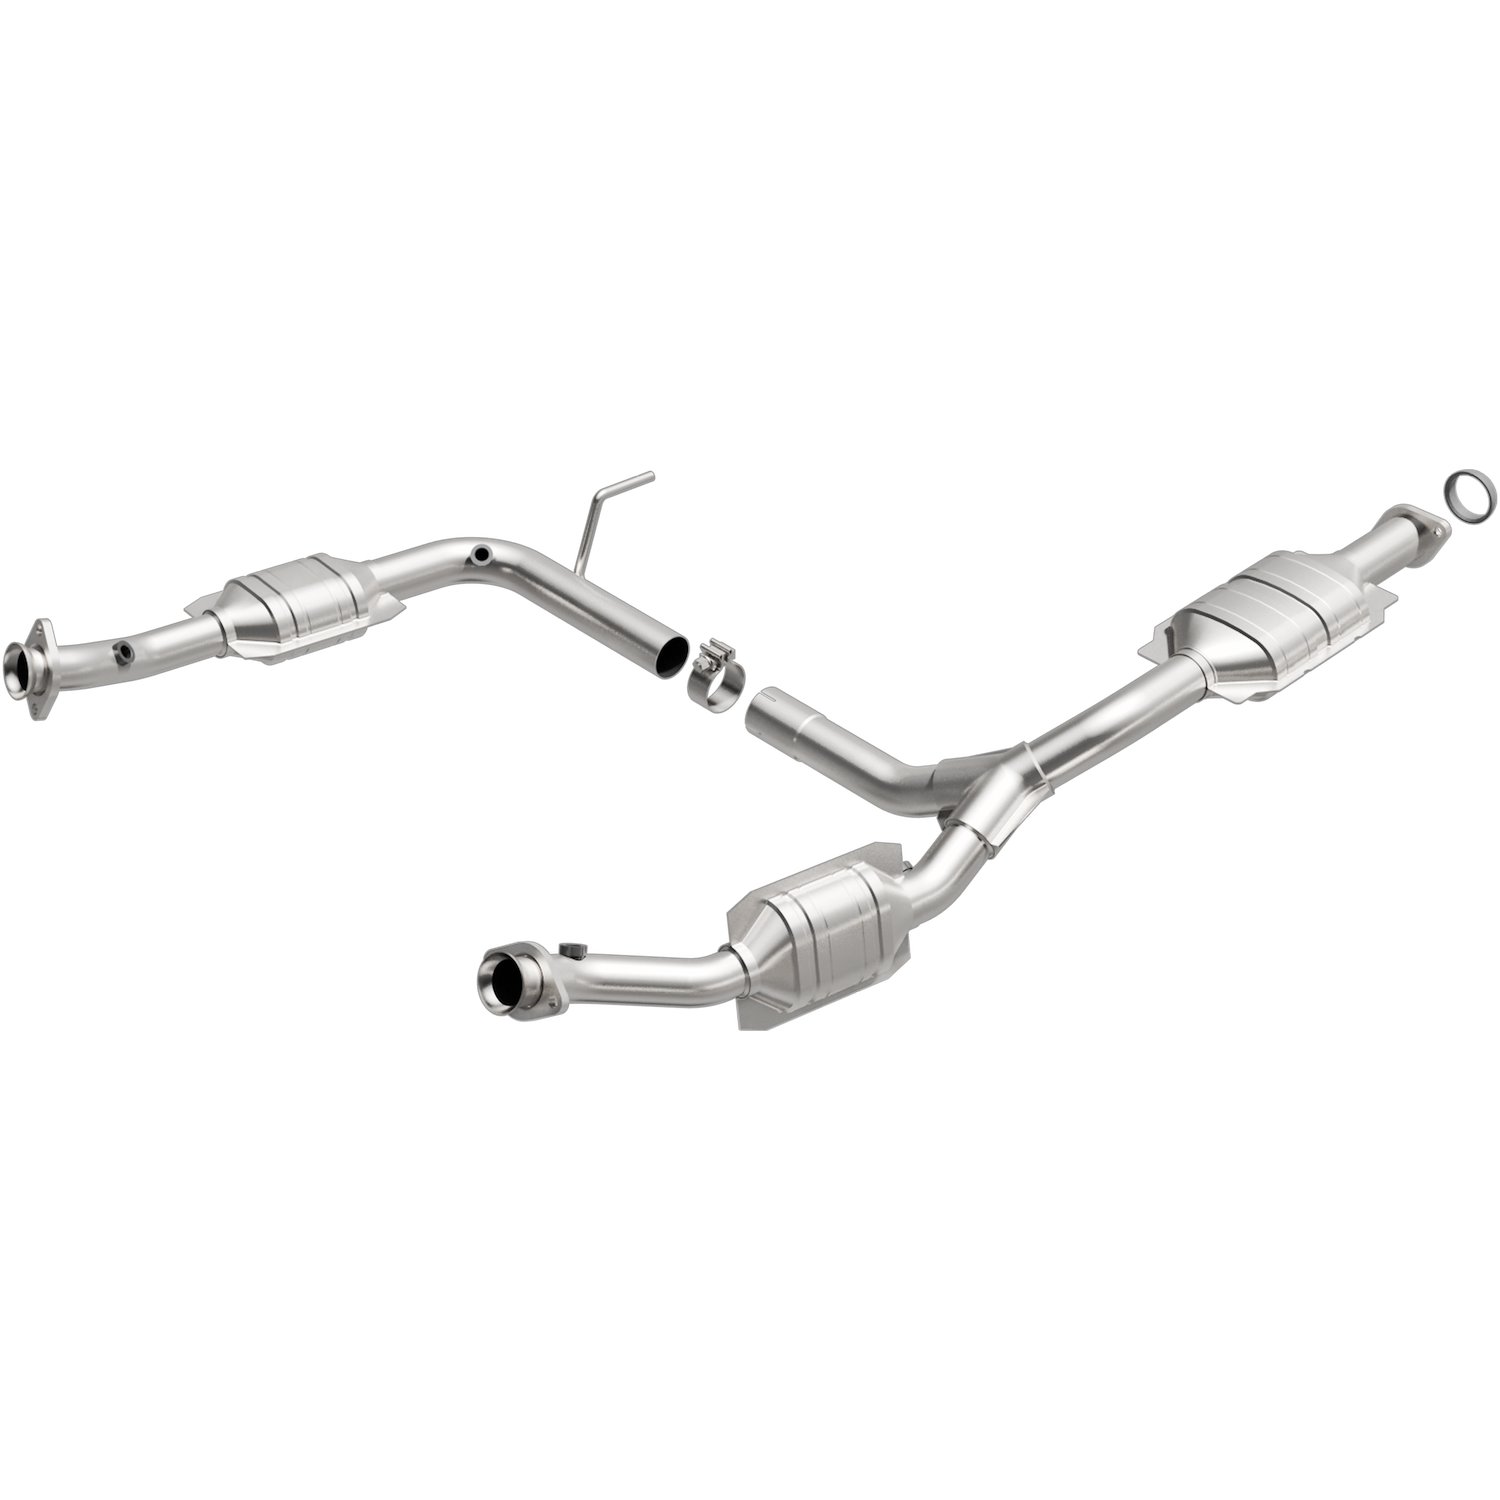 Direct-Fit Catalytic Converter 2002-03 Explorer/Mountaineer 4.0L (Rear)